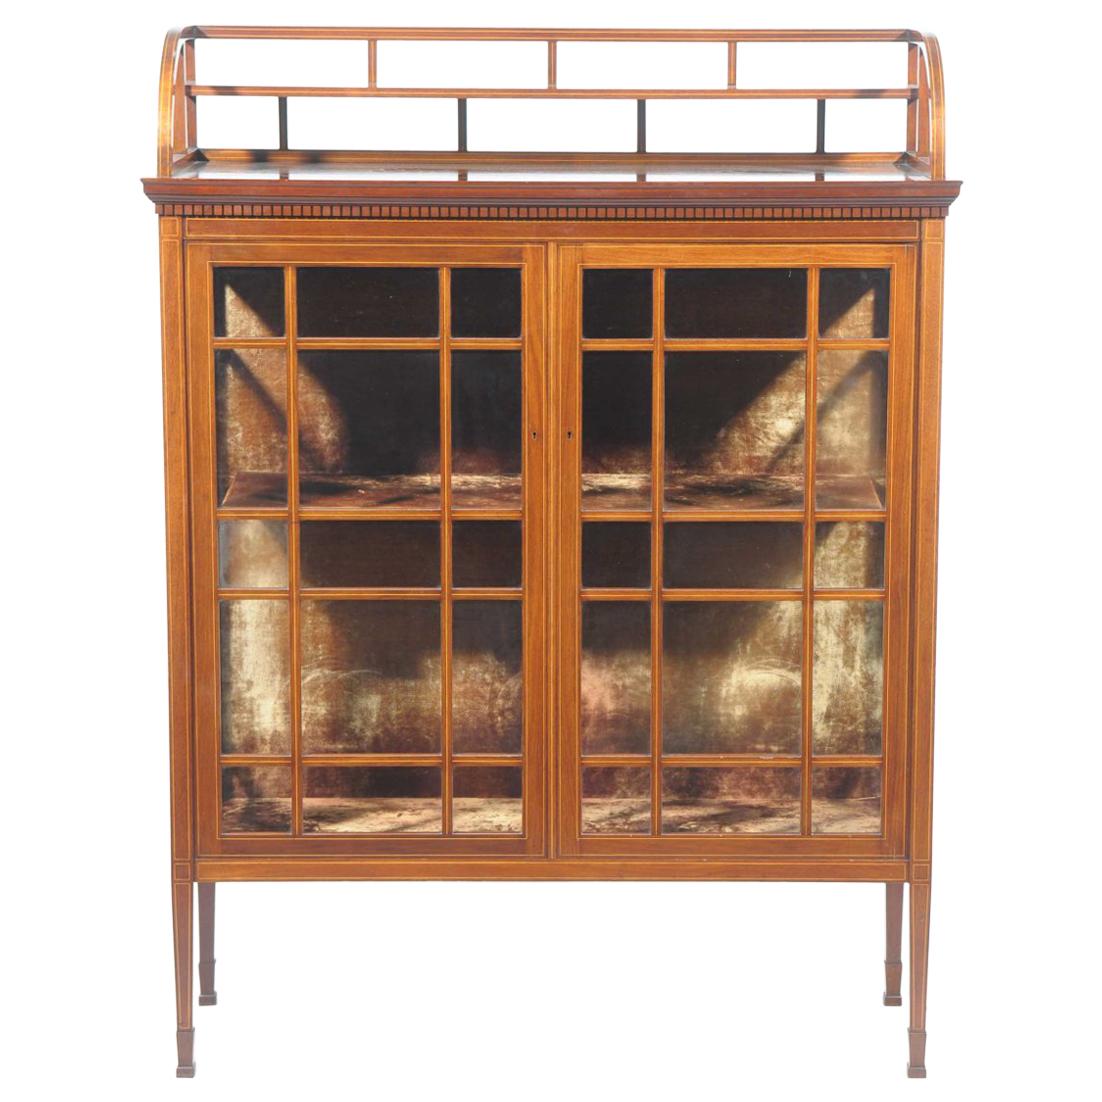 E W Godwin, Collinson & Lock, an Anglo Japanese Mahogany and Satinwood Cabinet For Sale